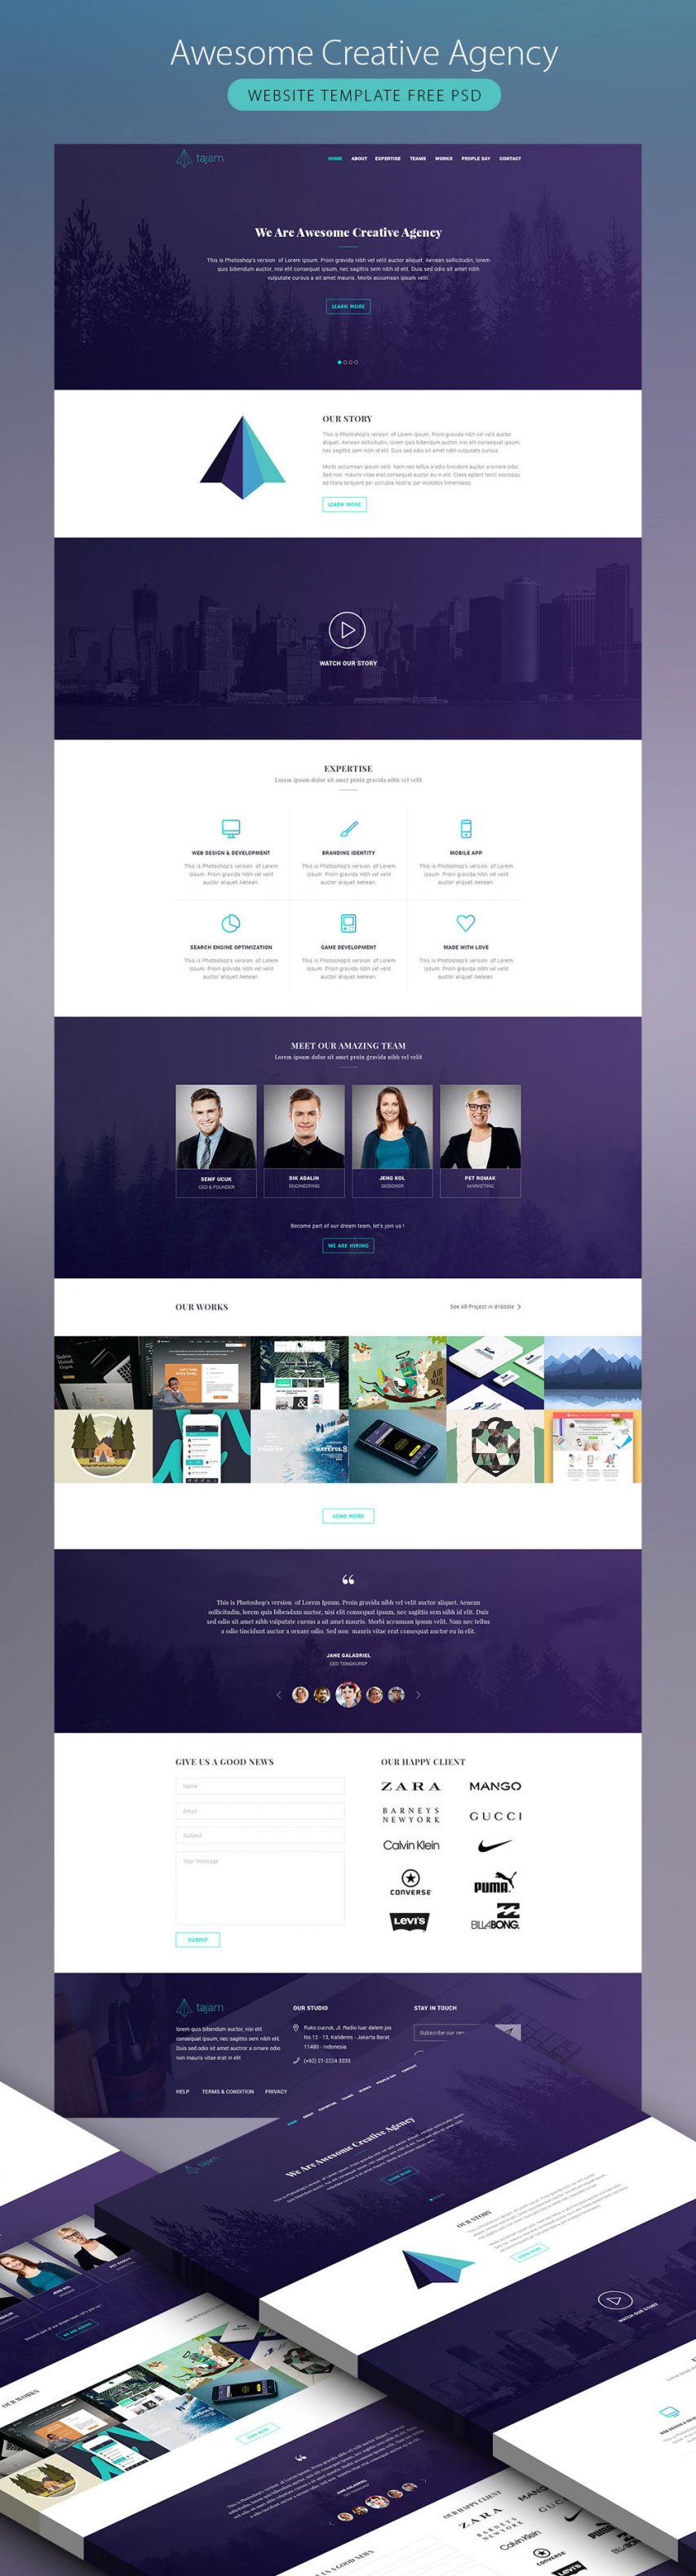 Awesome Creative Agency Website Template Free 